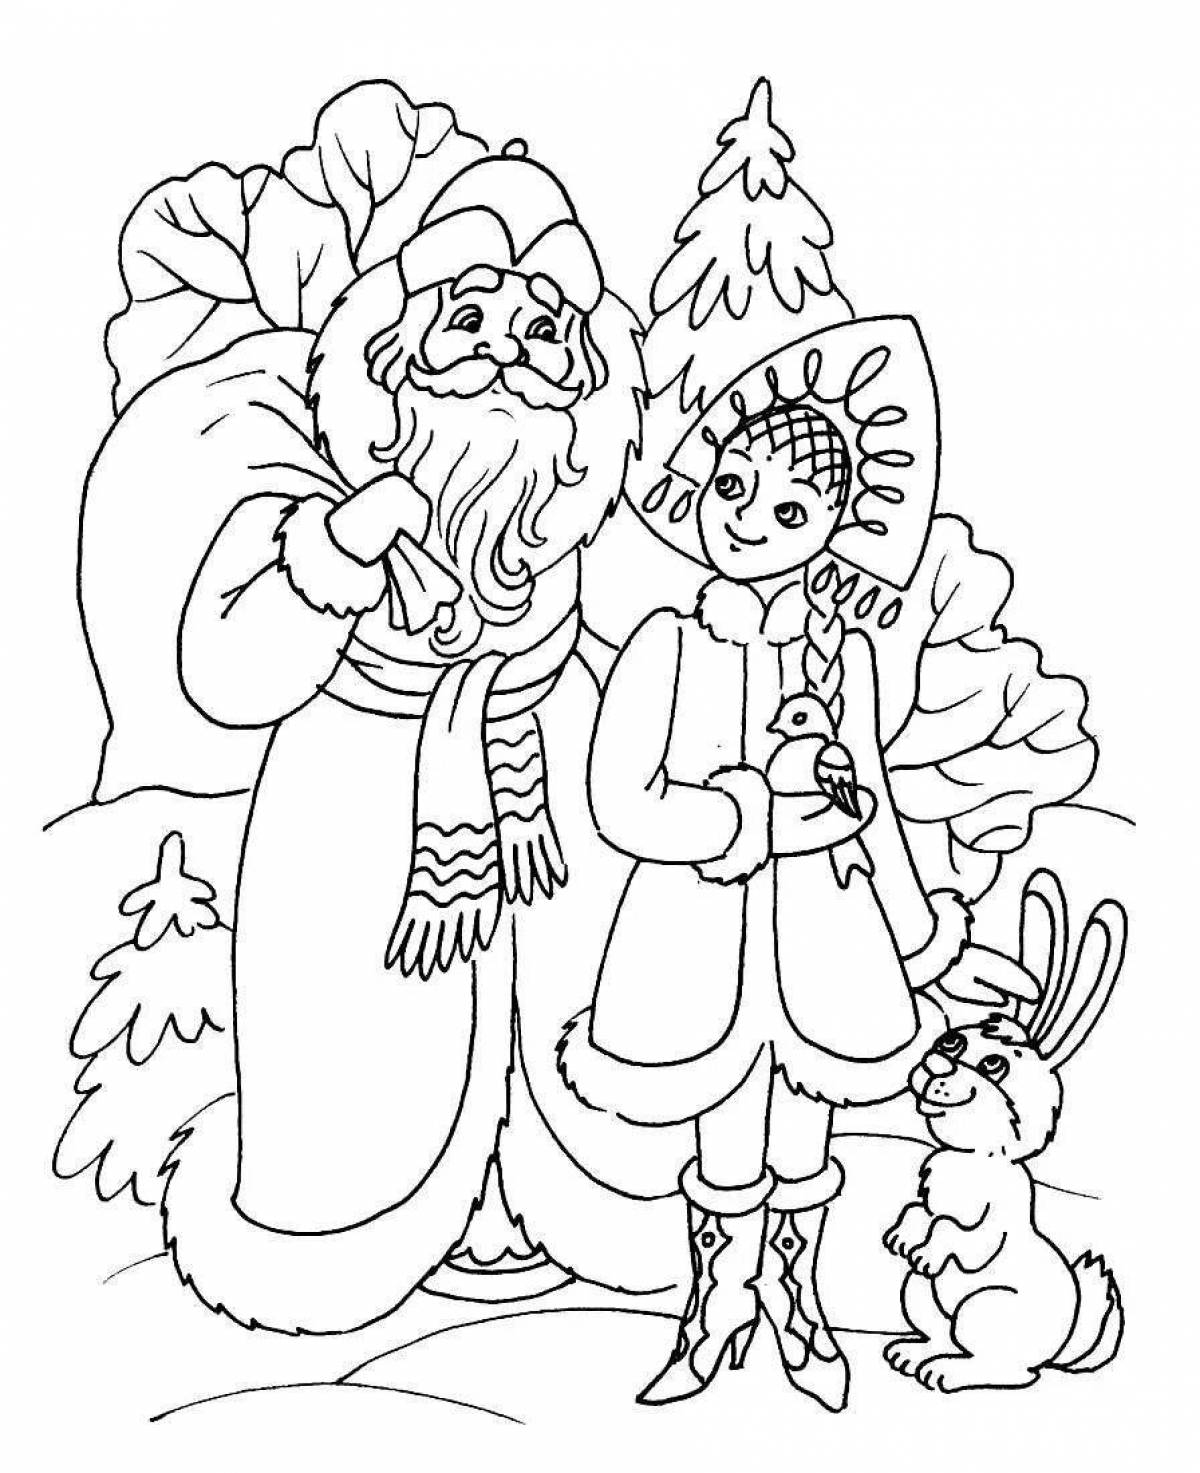 Delightful coloring tree and snow maiden